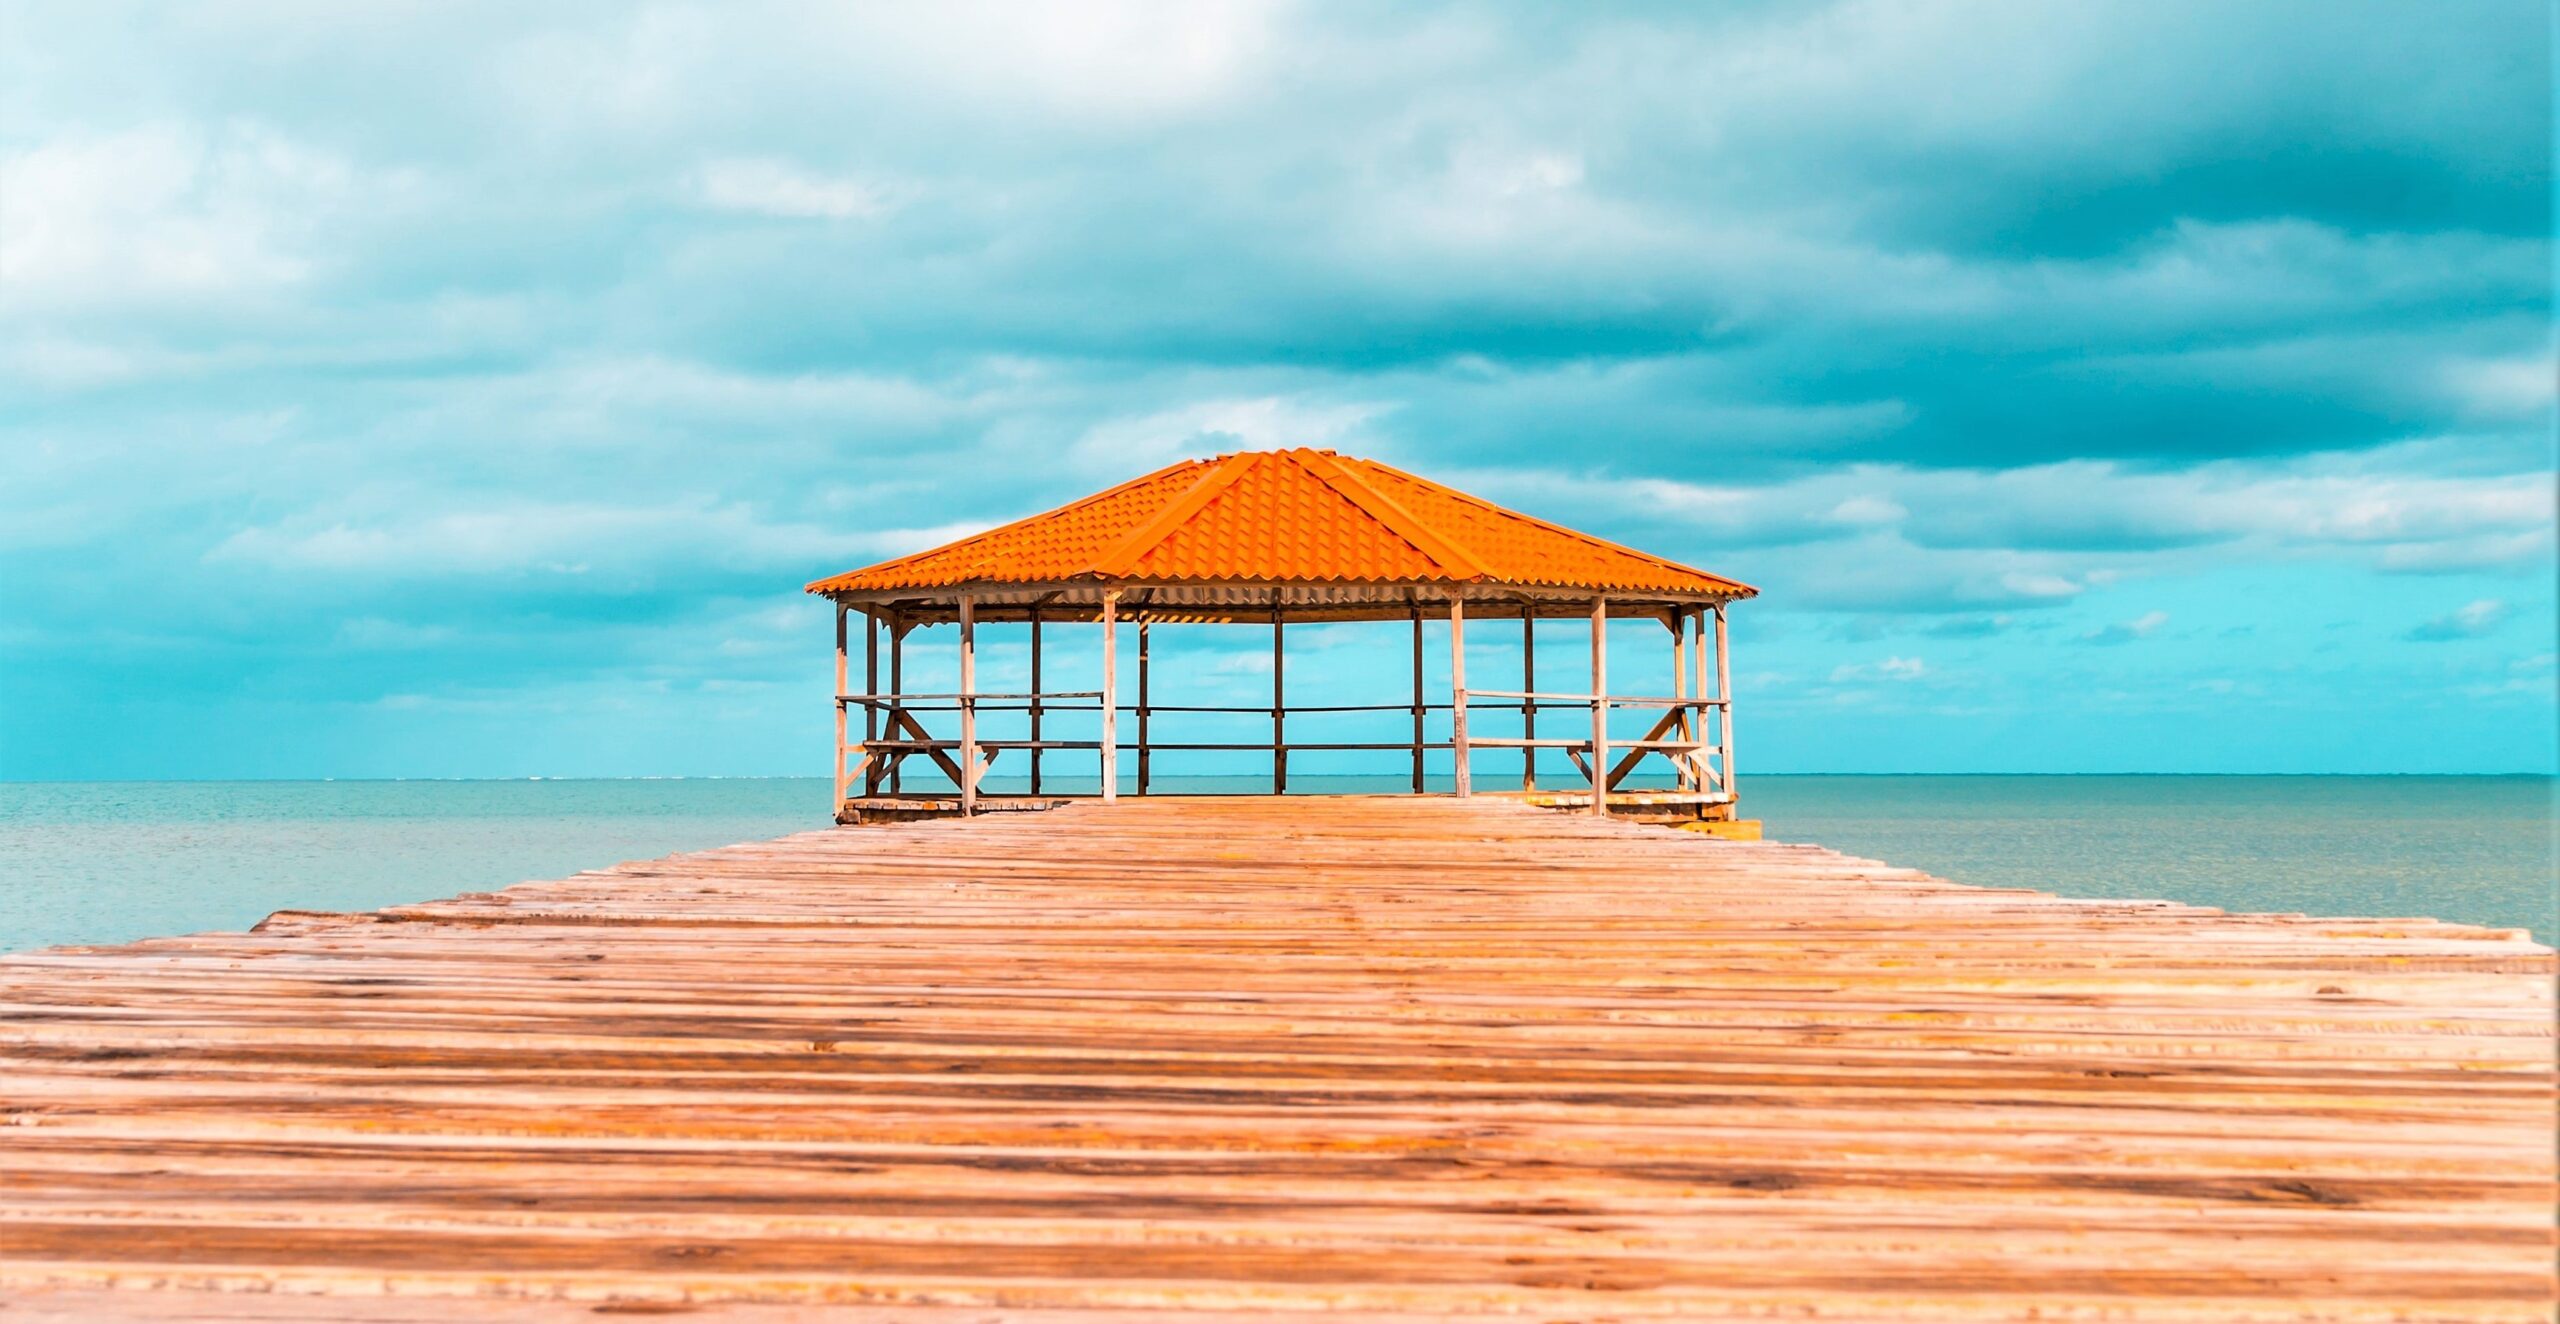 A pergola is set at the end of a boardwalk by the ocean, with a deep, saturated orange roof. The sky is bright turquoise and the boardwalk is made of natural rich toned wood planks.